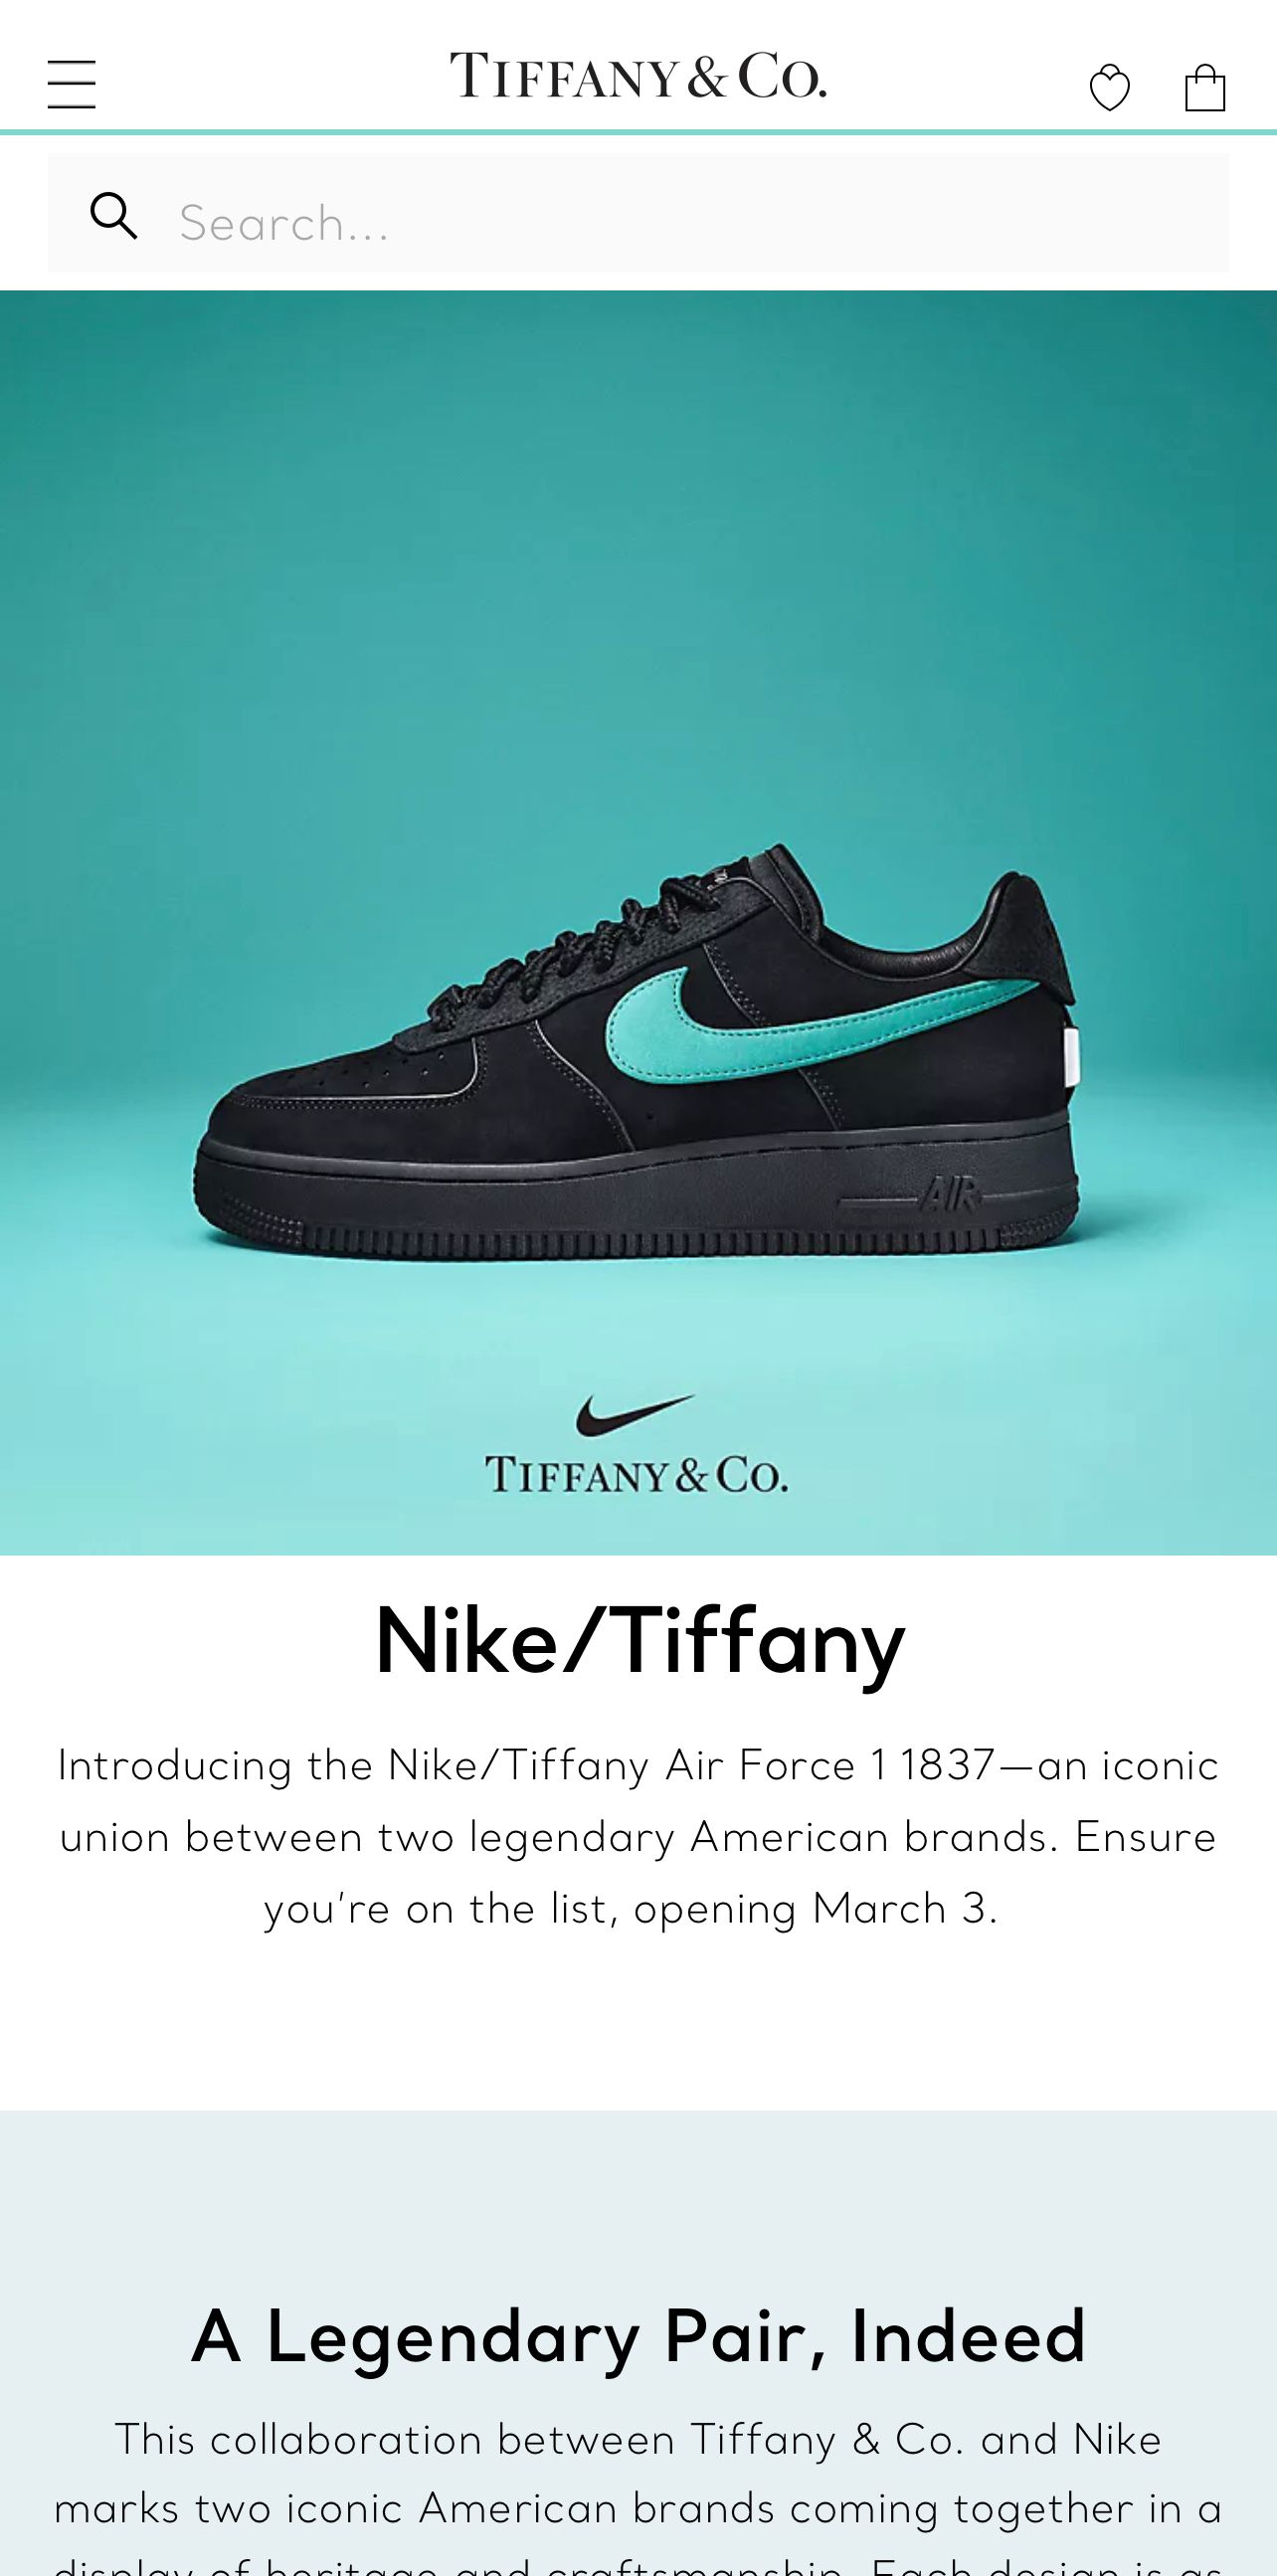 How To Purchase The Tiffany & Co. x Nike Air Force 1 Low 1837 For